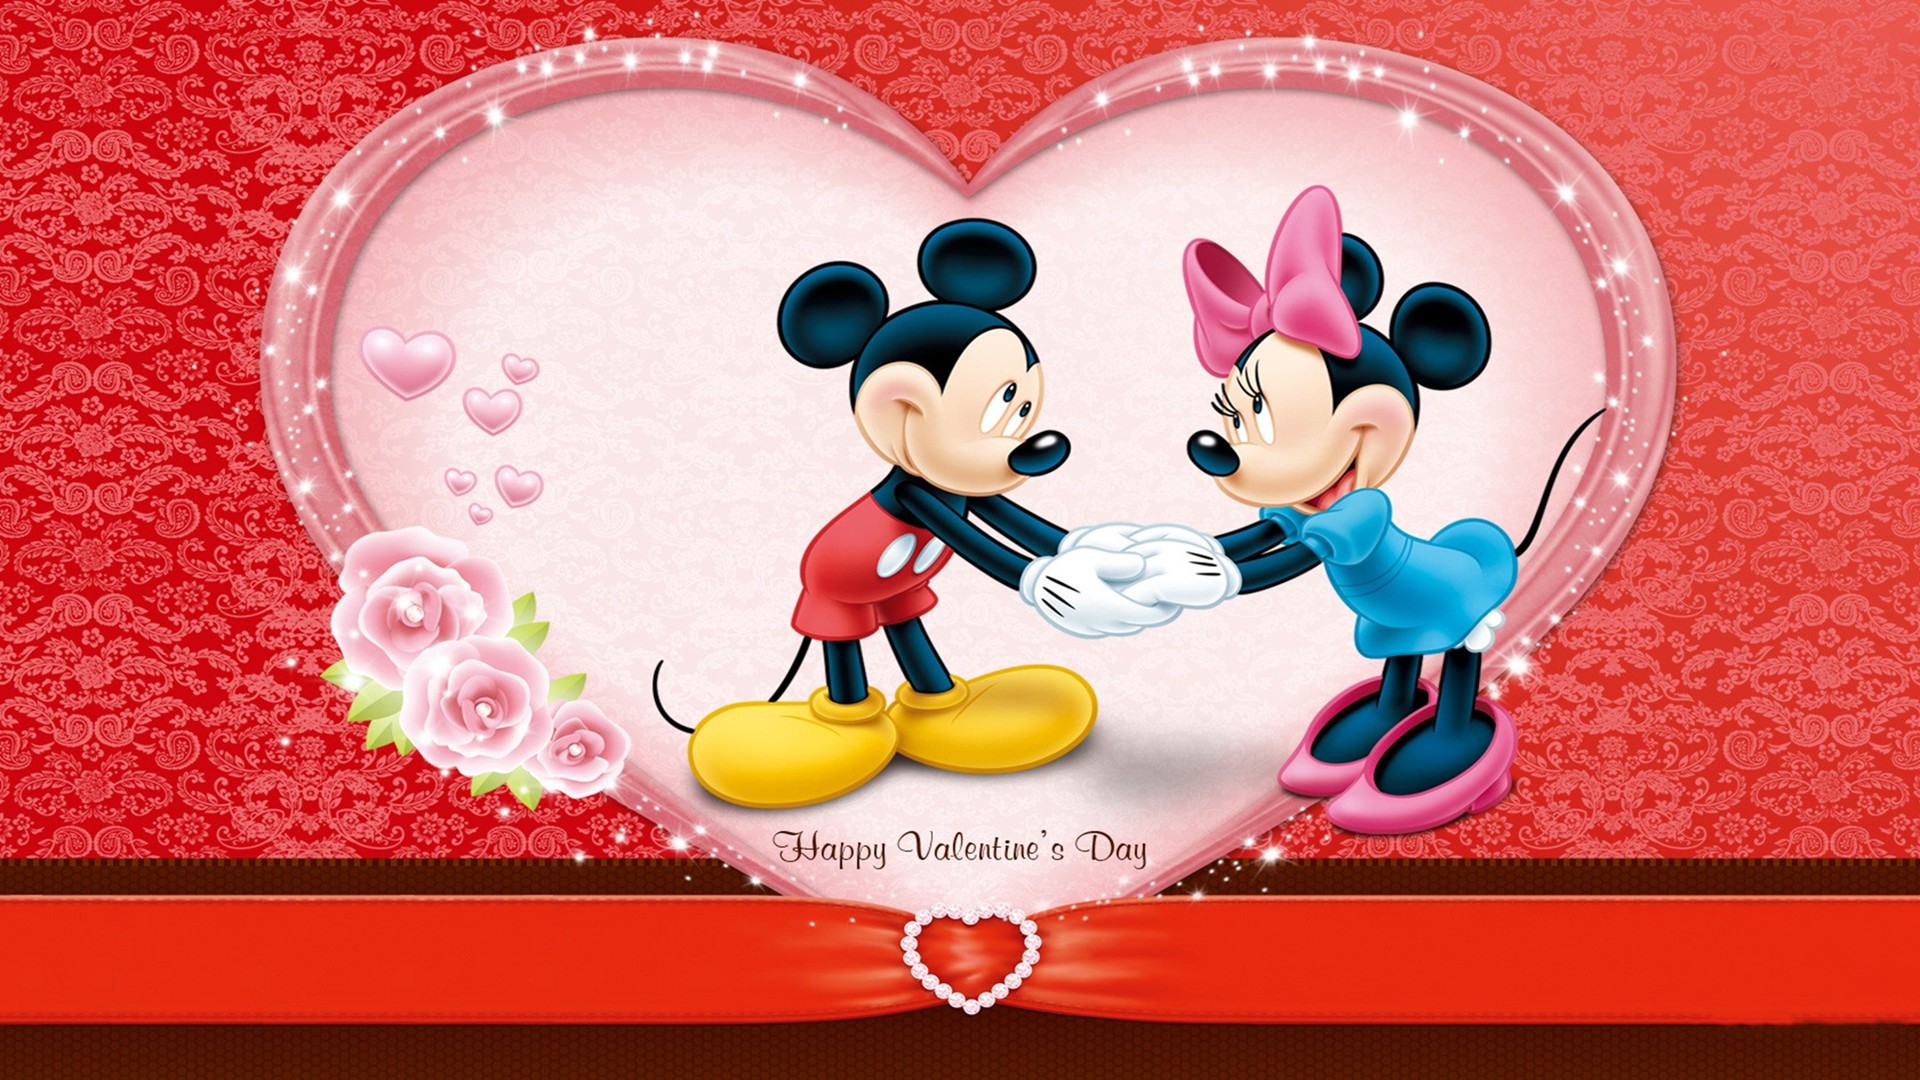 happy-valentines-day-2016-wishes-messages-hd-wallpaper.jpg